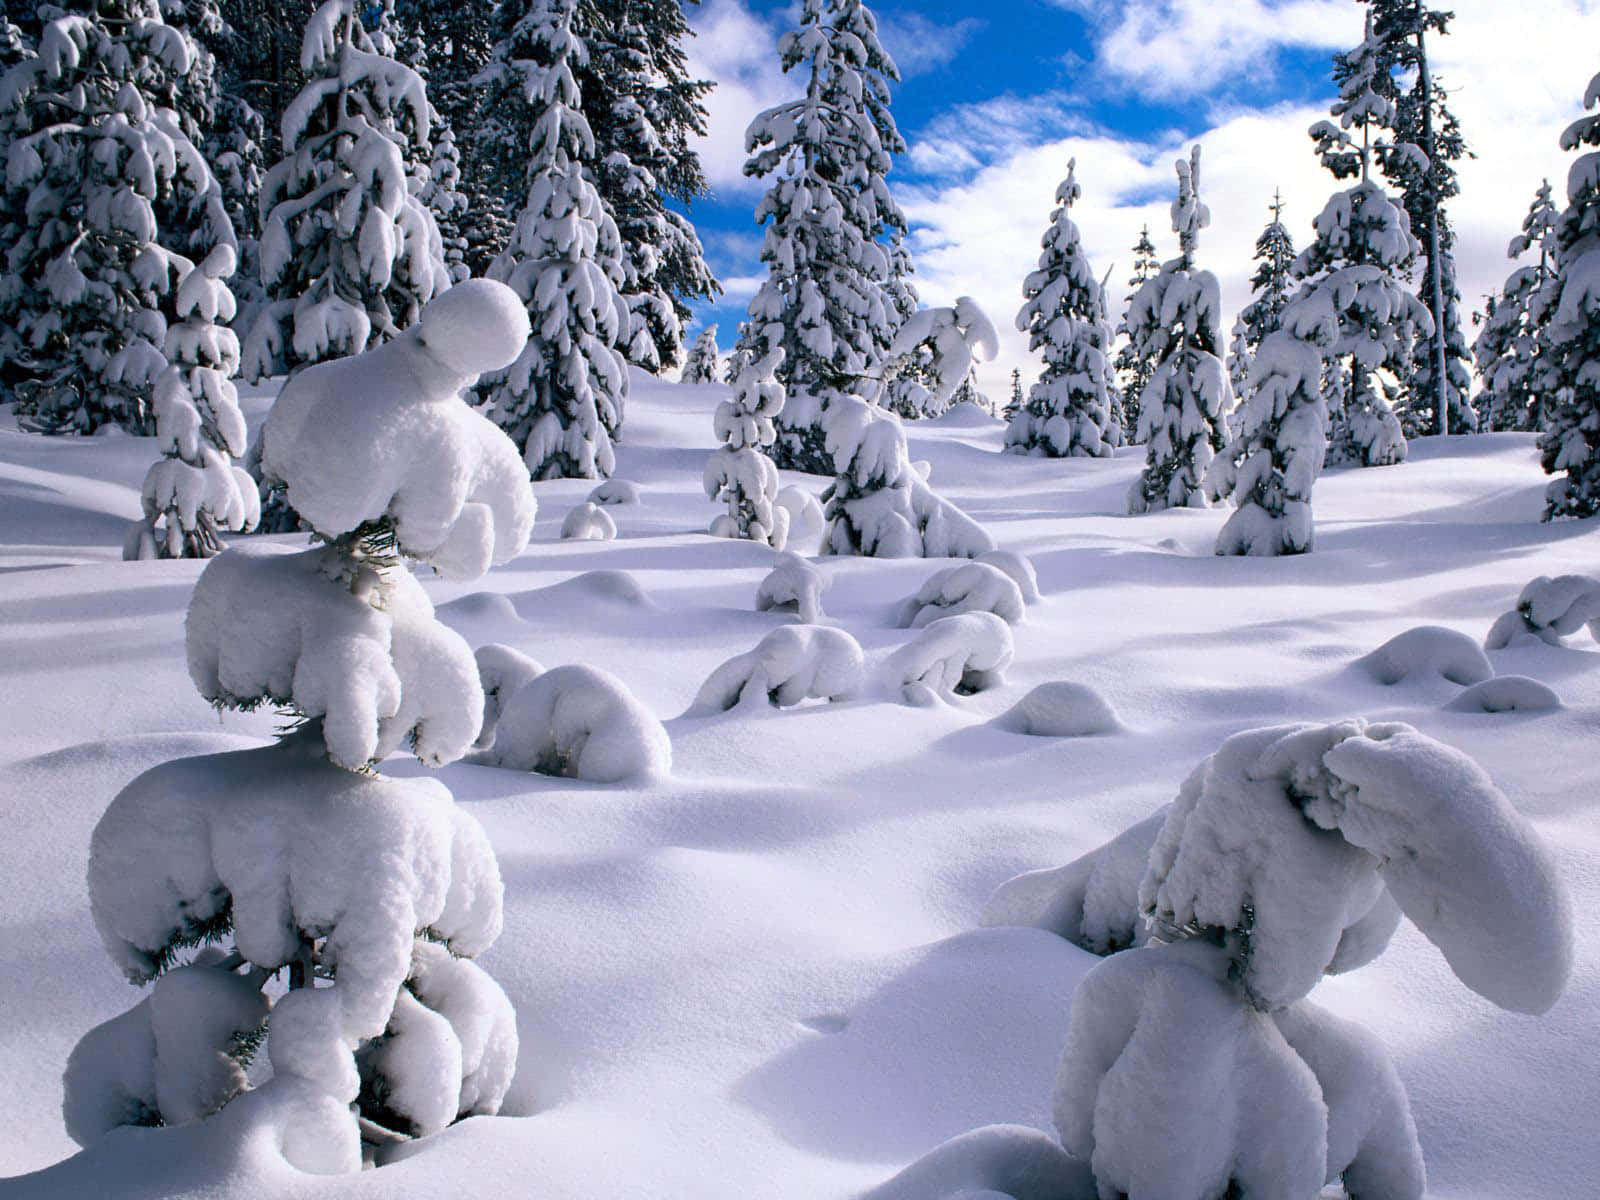 Enjoy the Beauty of Nature this Winter